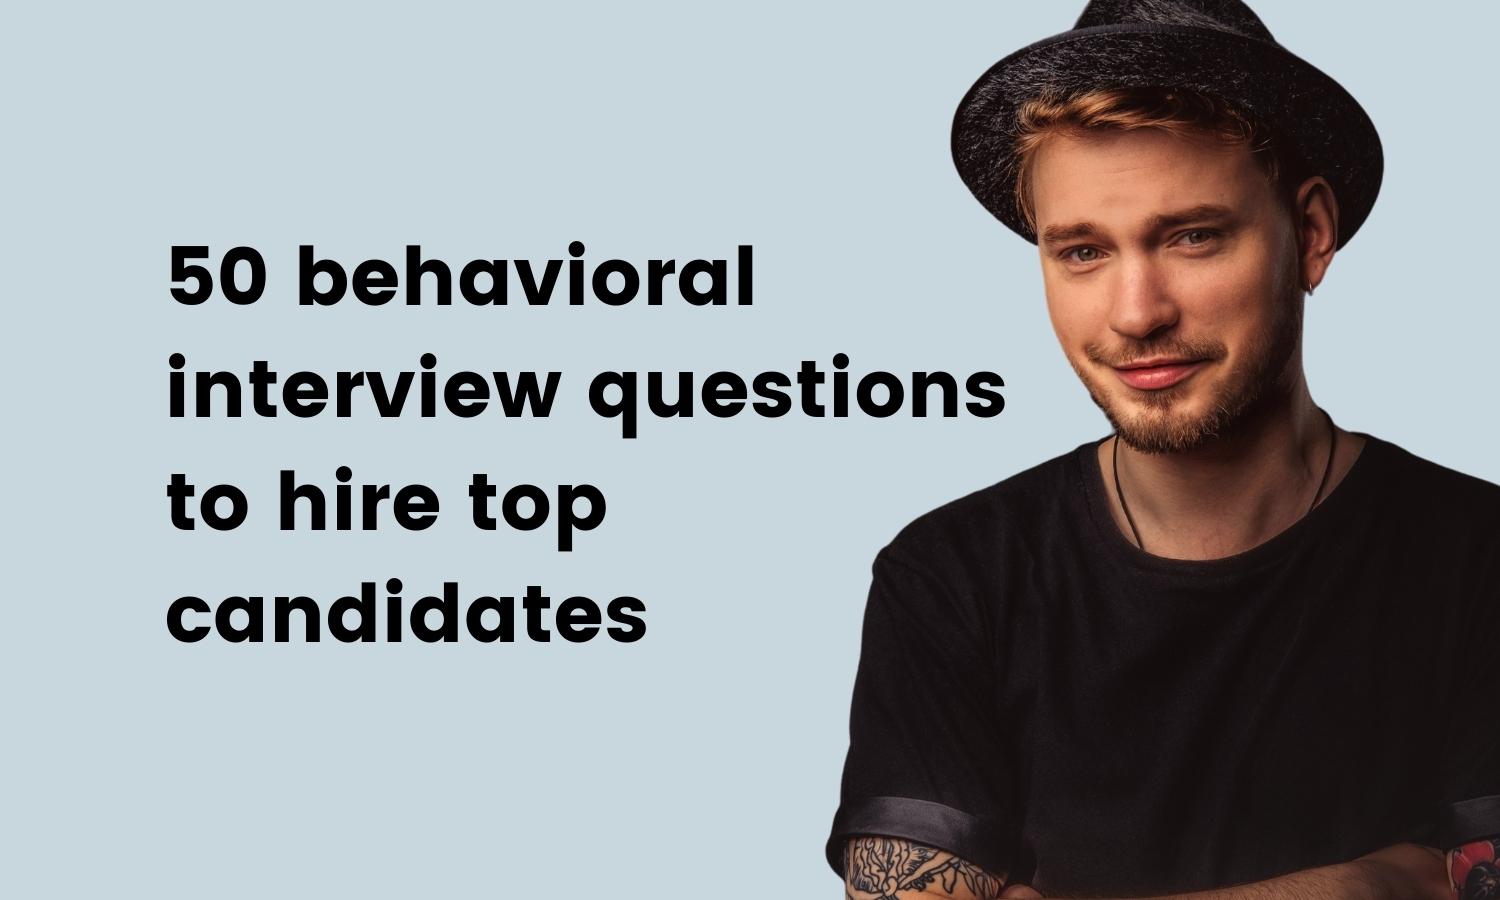 50 behavioral interview questions to hire top candidates